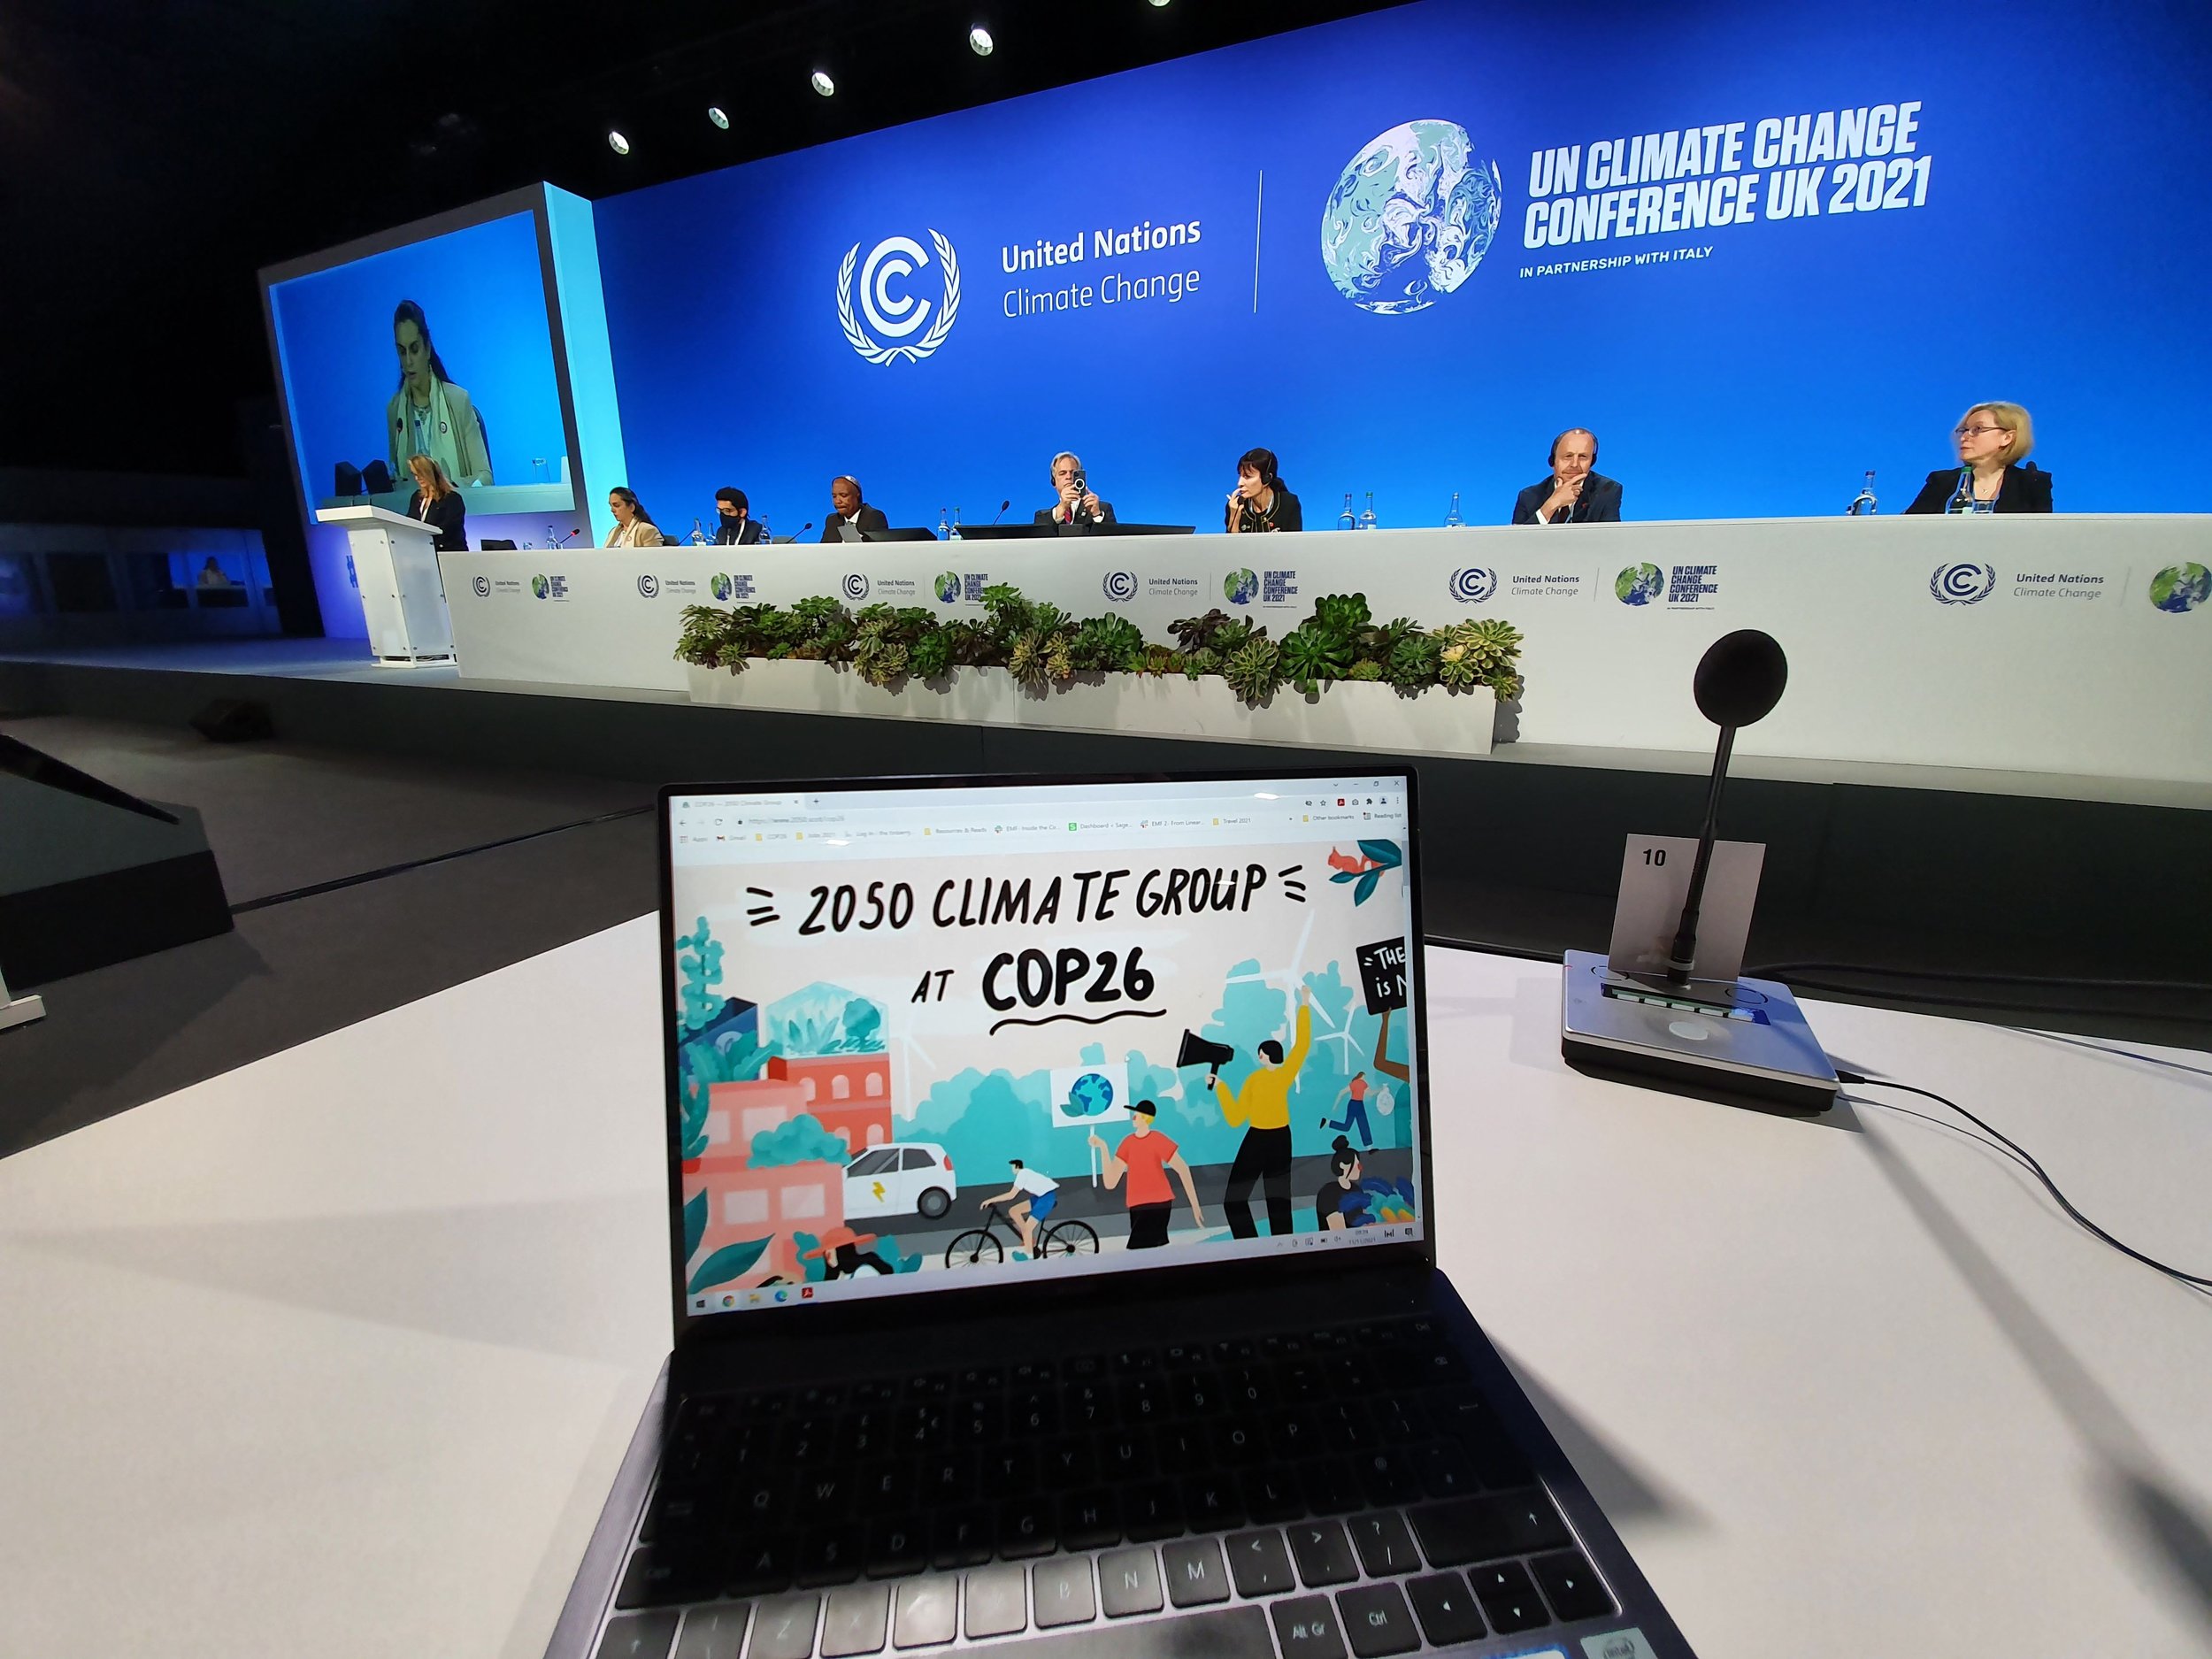 2050 Climate Group attend Presidency Event